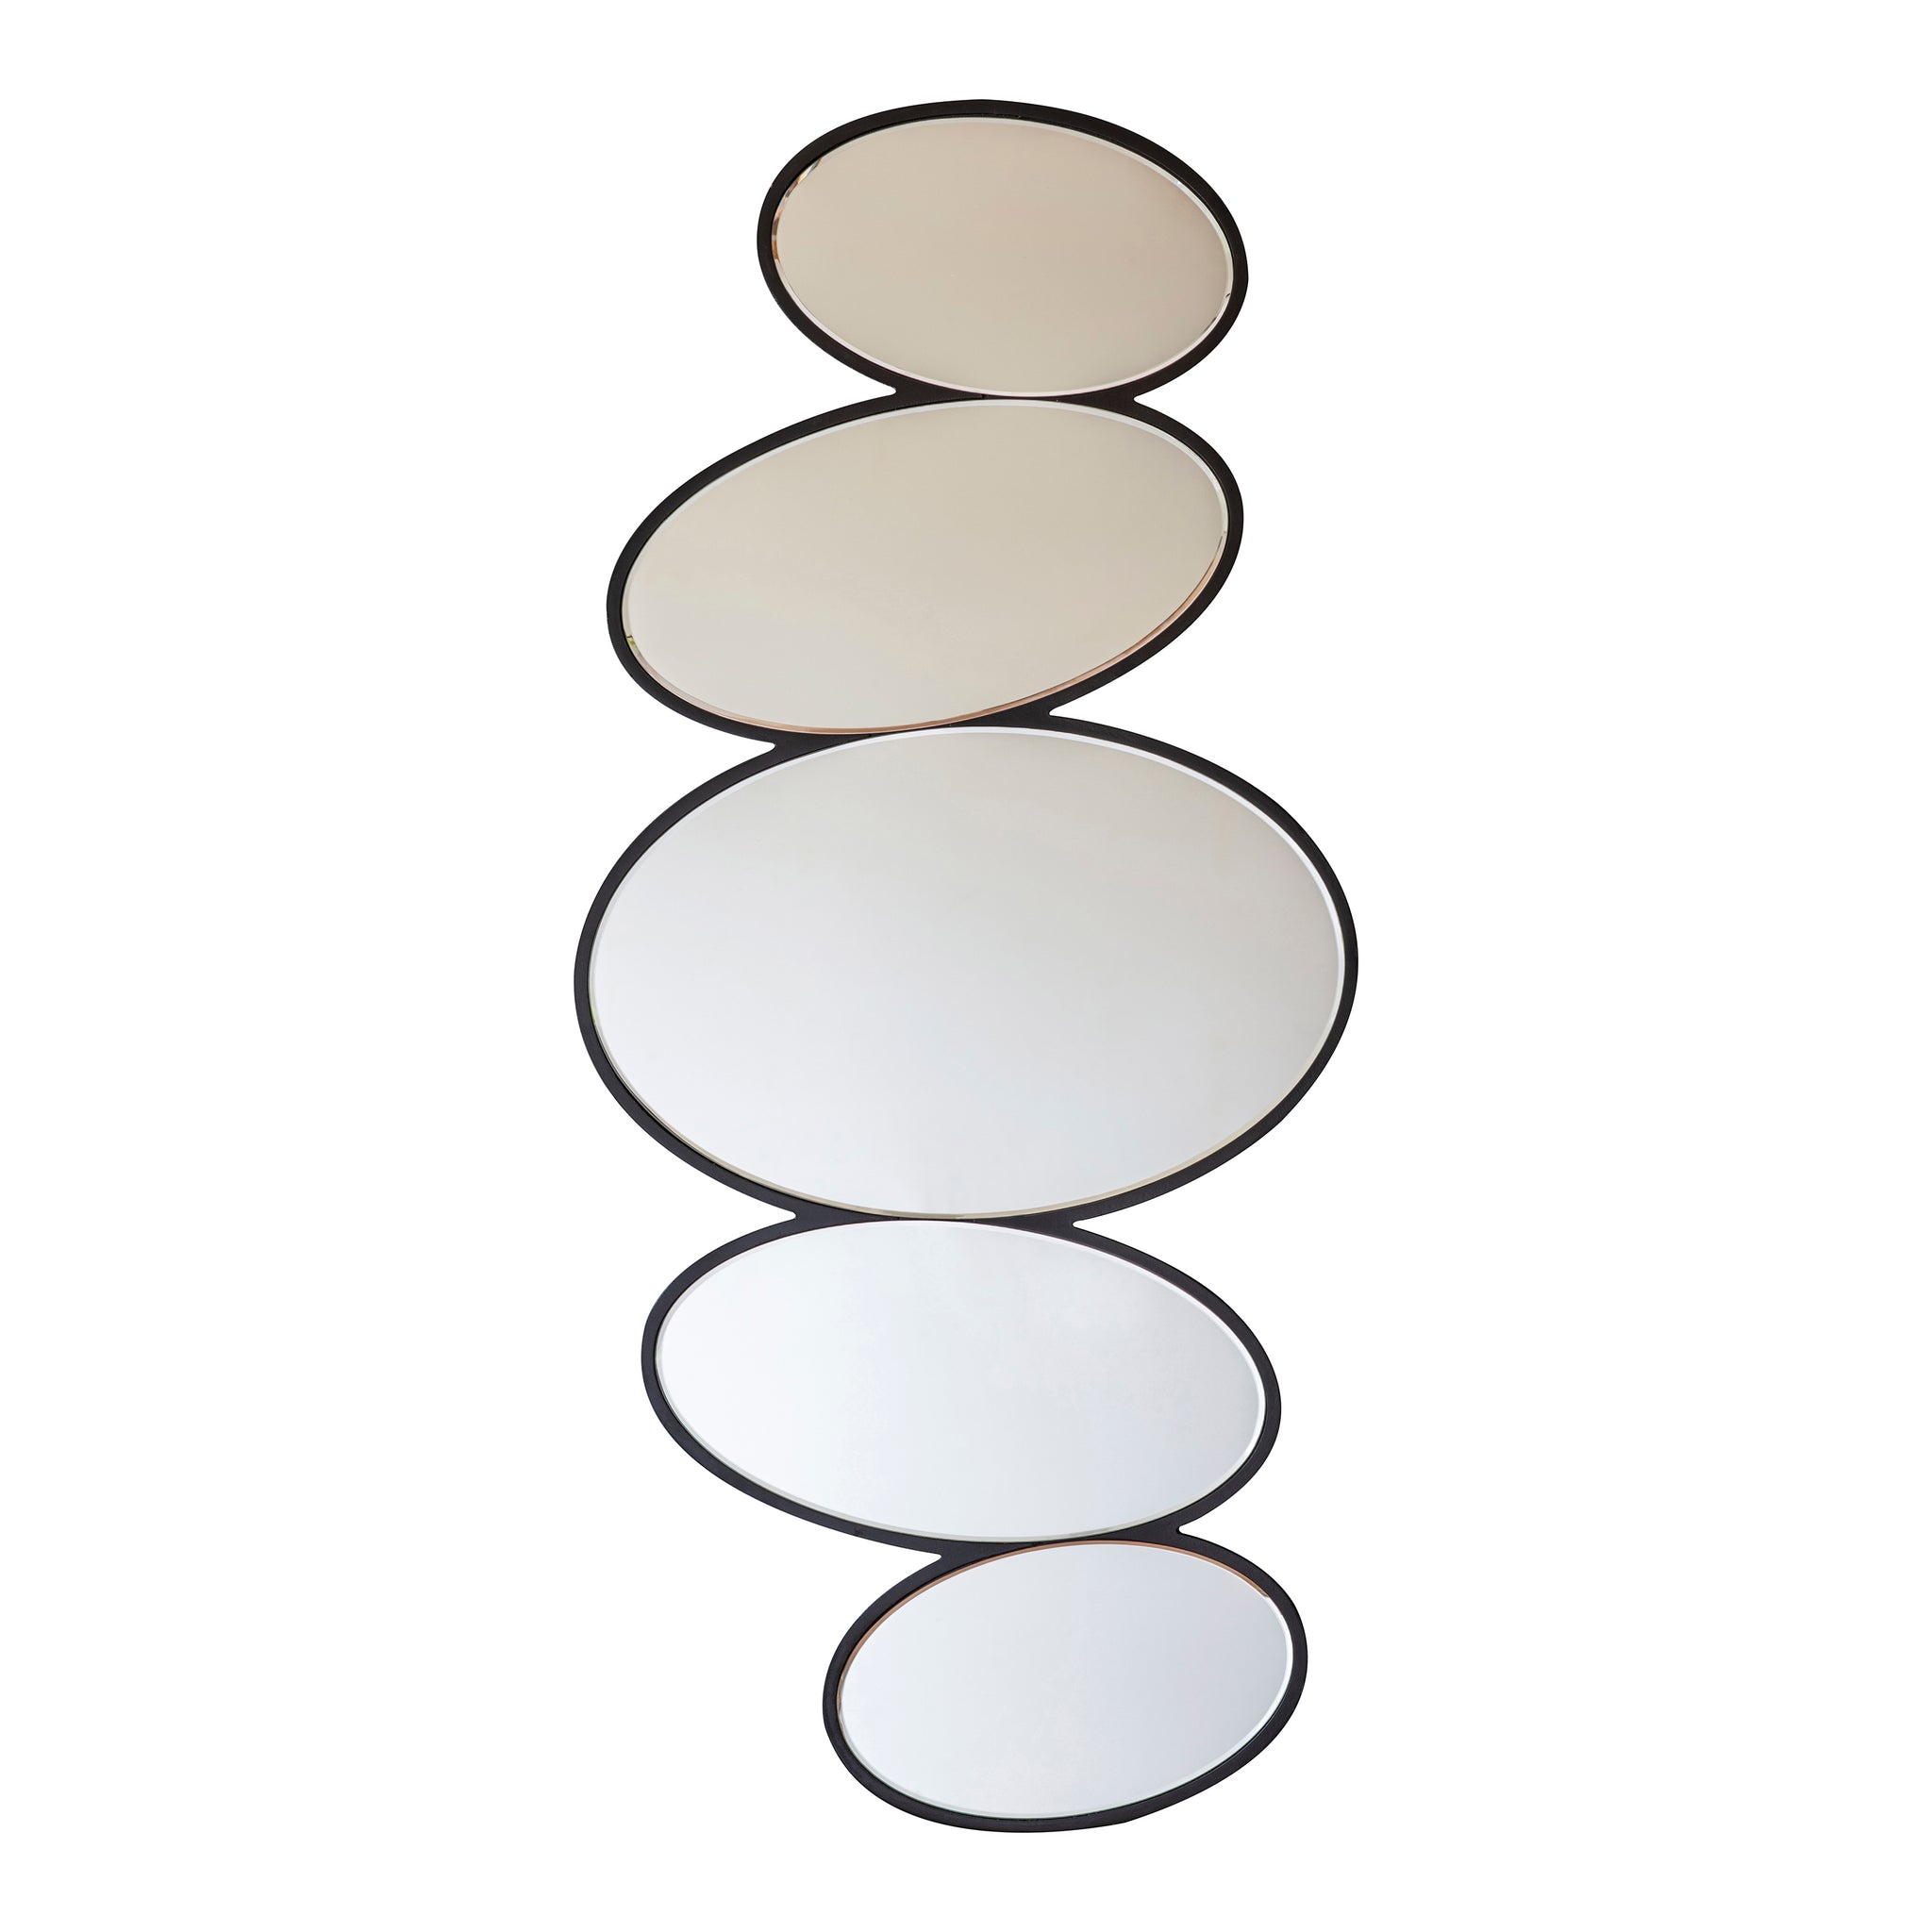 Aders Pebble Stack Mirror